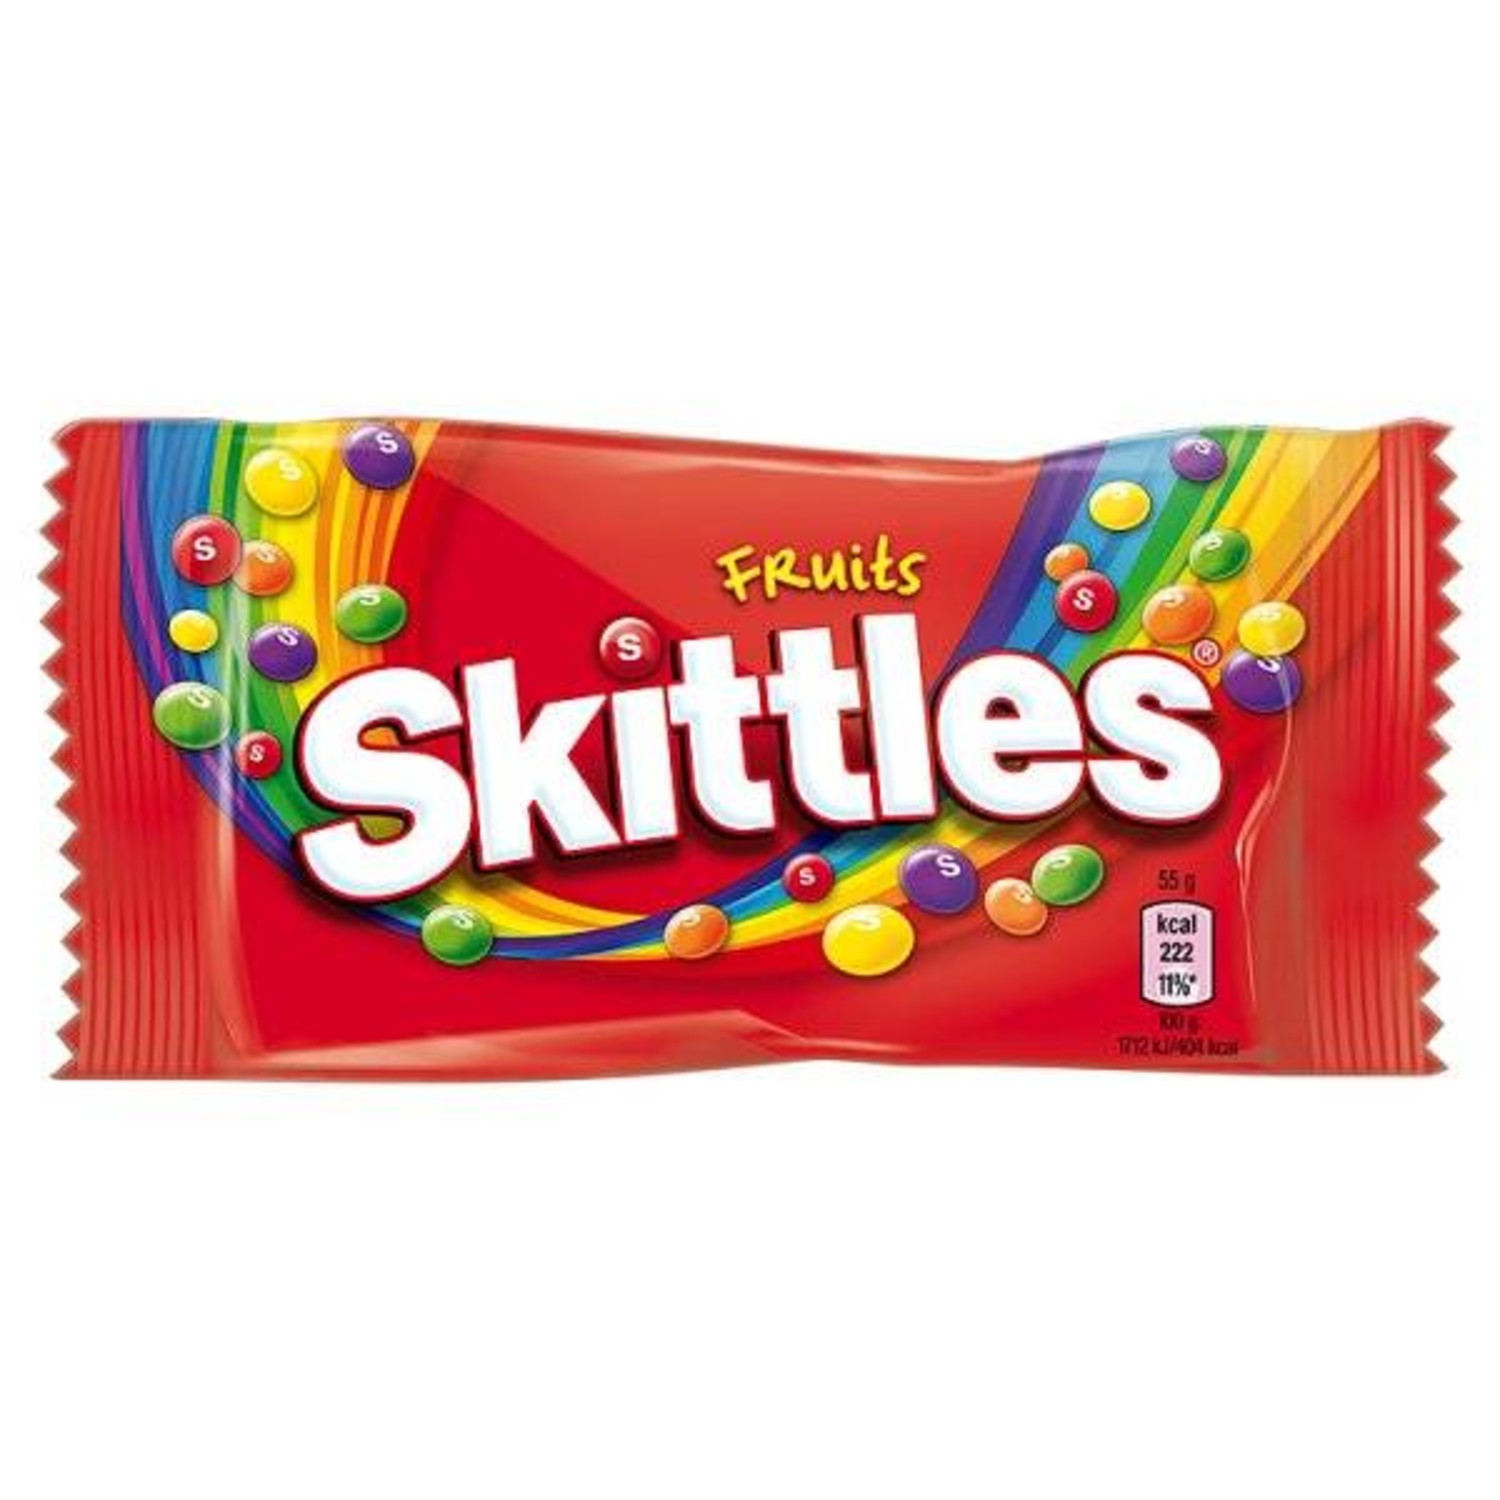 dorothy hurt recommends Picture Of Skittles